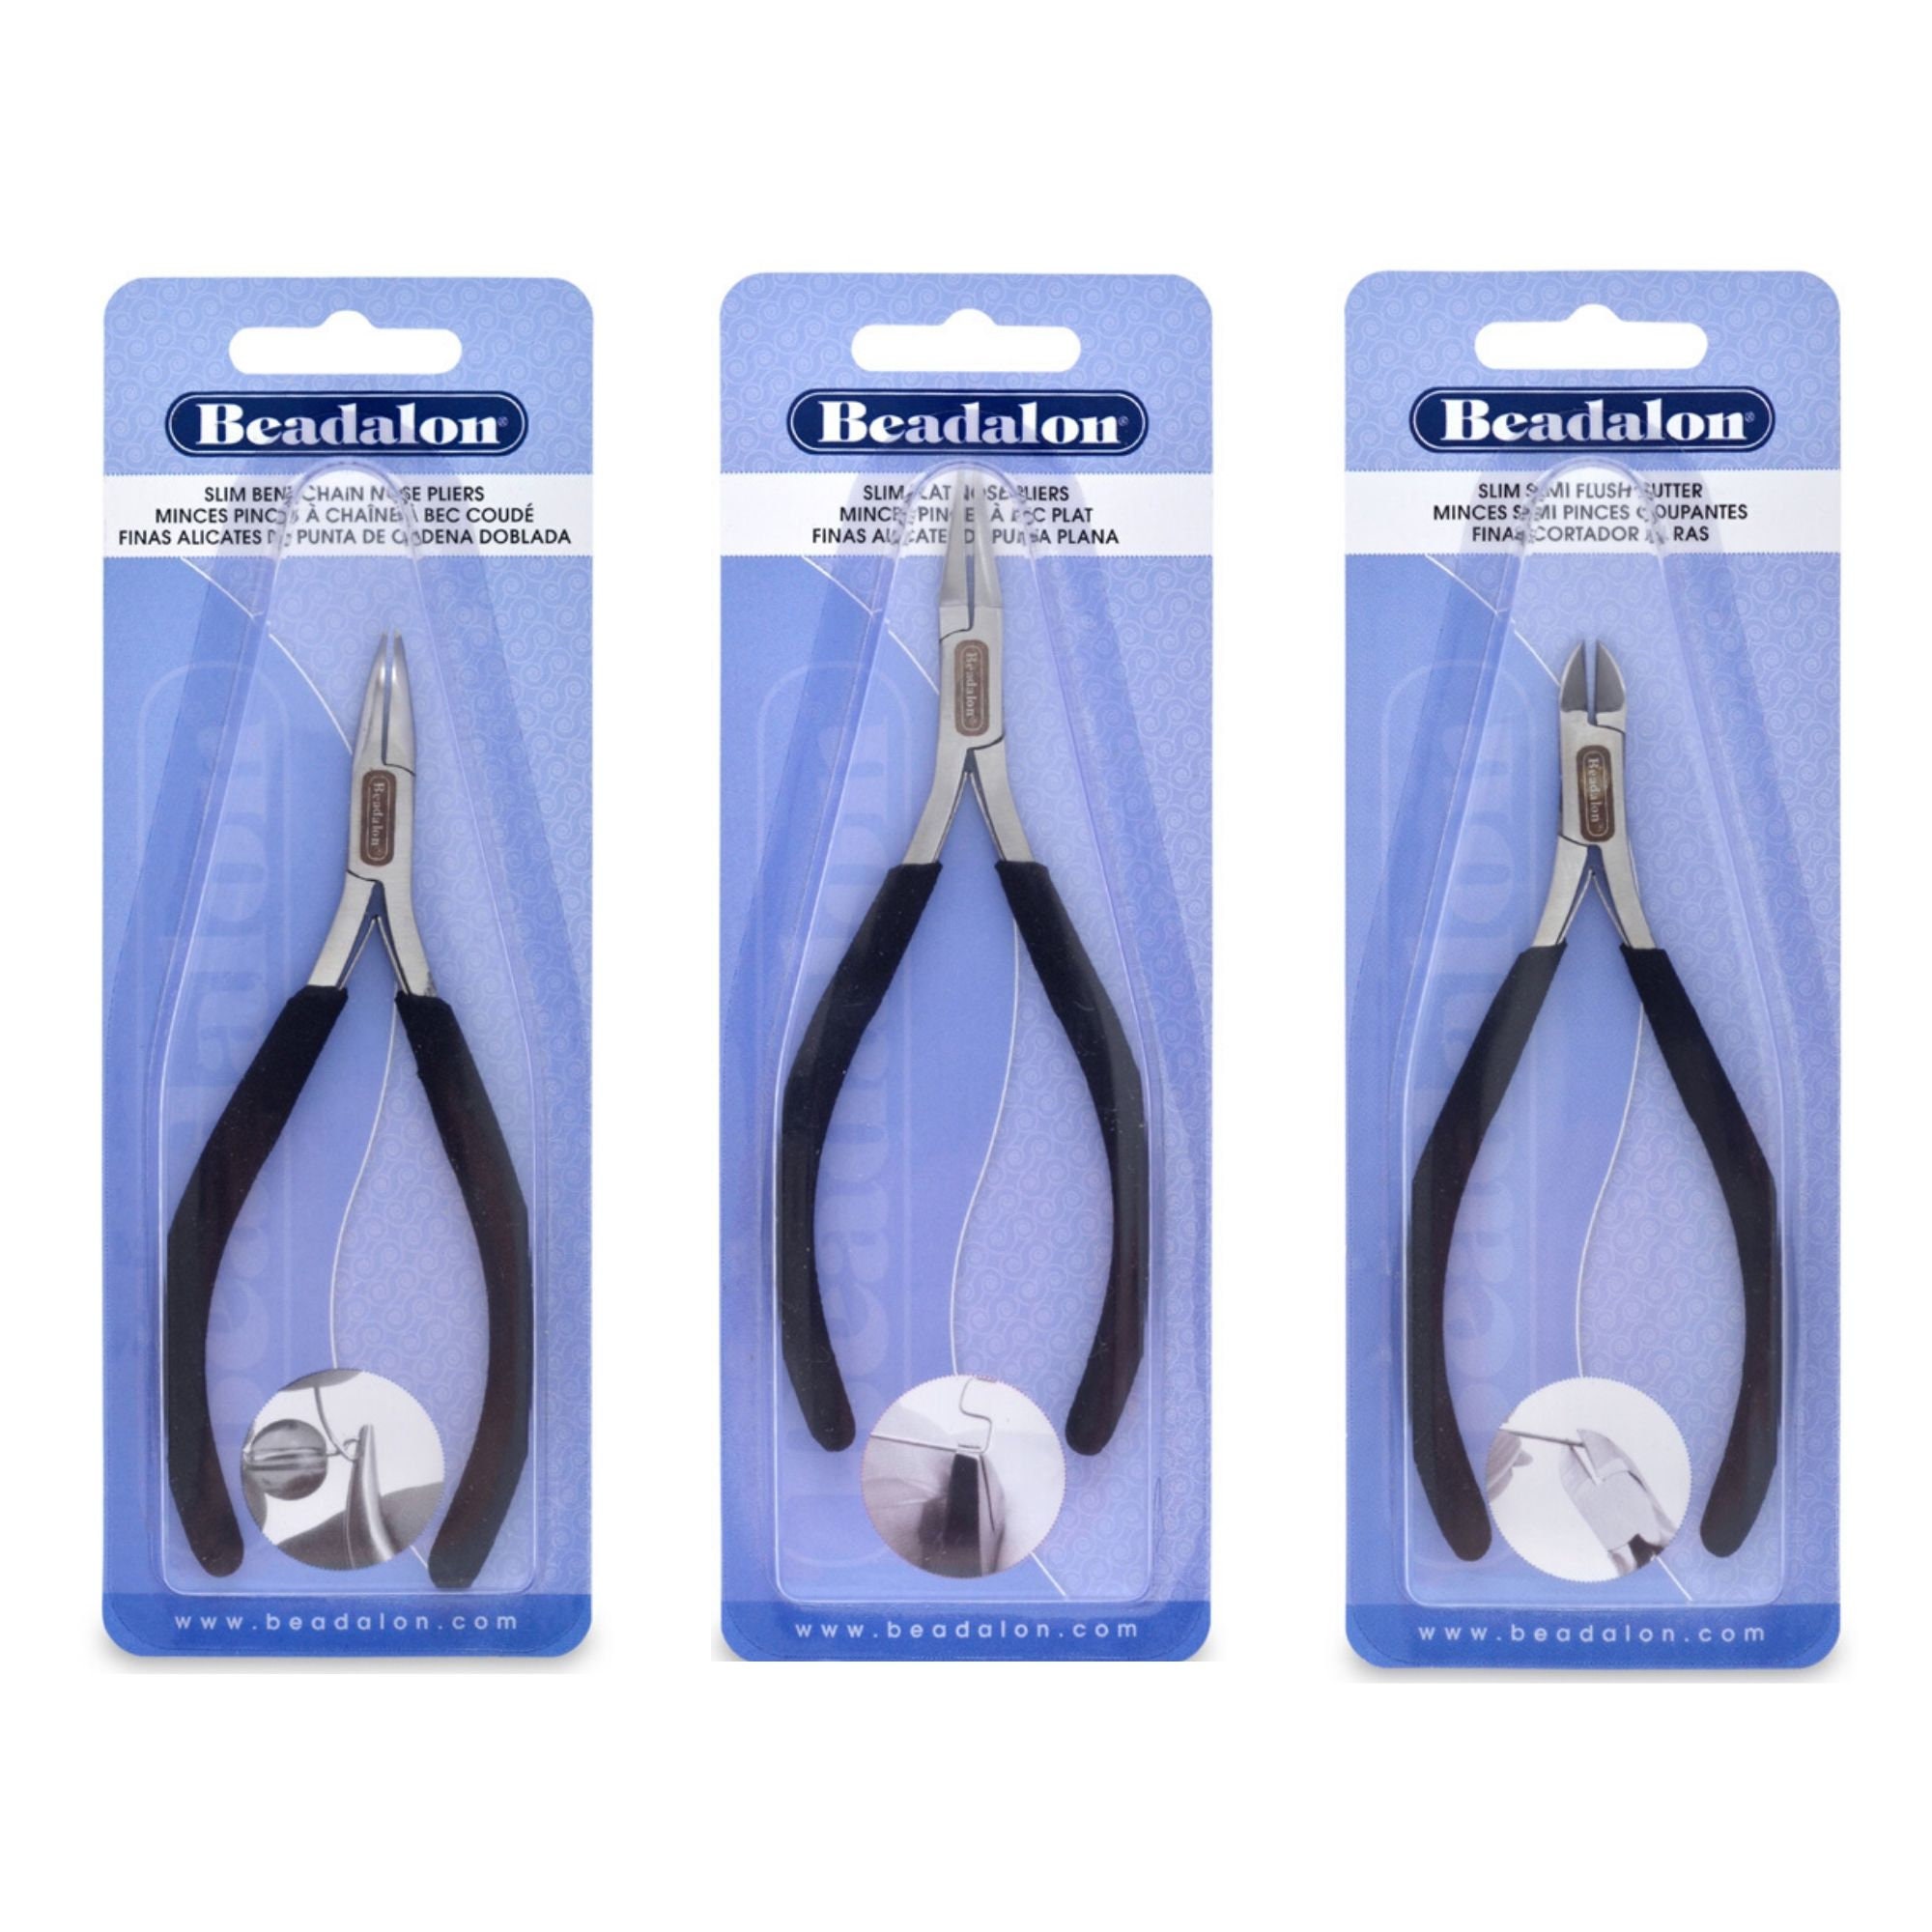 5 Beadsmith Brand Ergonomic Grip Flush Soft Wire/Knot Cutter - For Use With  16g Wire Or Less - Professional Jewelry-Making Tool - (PL270)